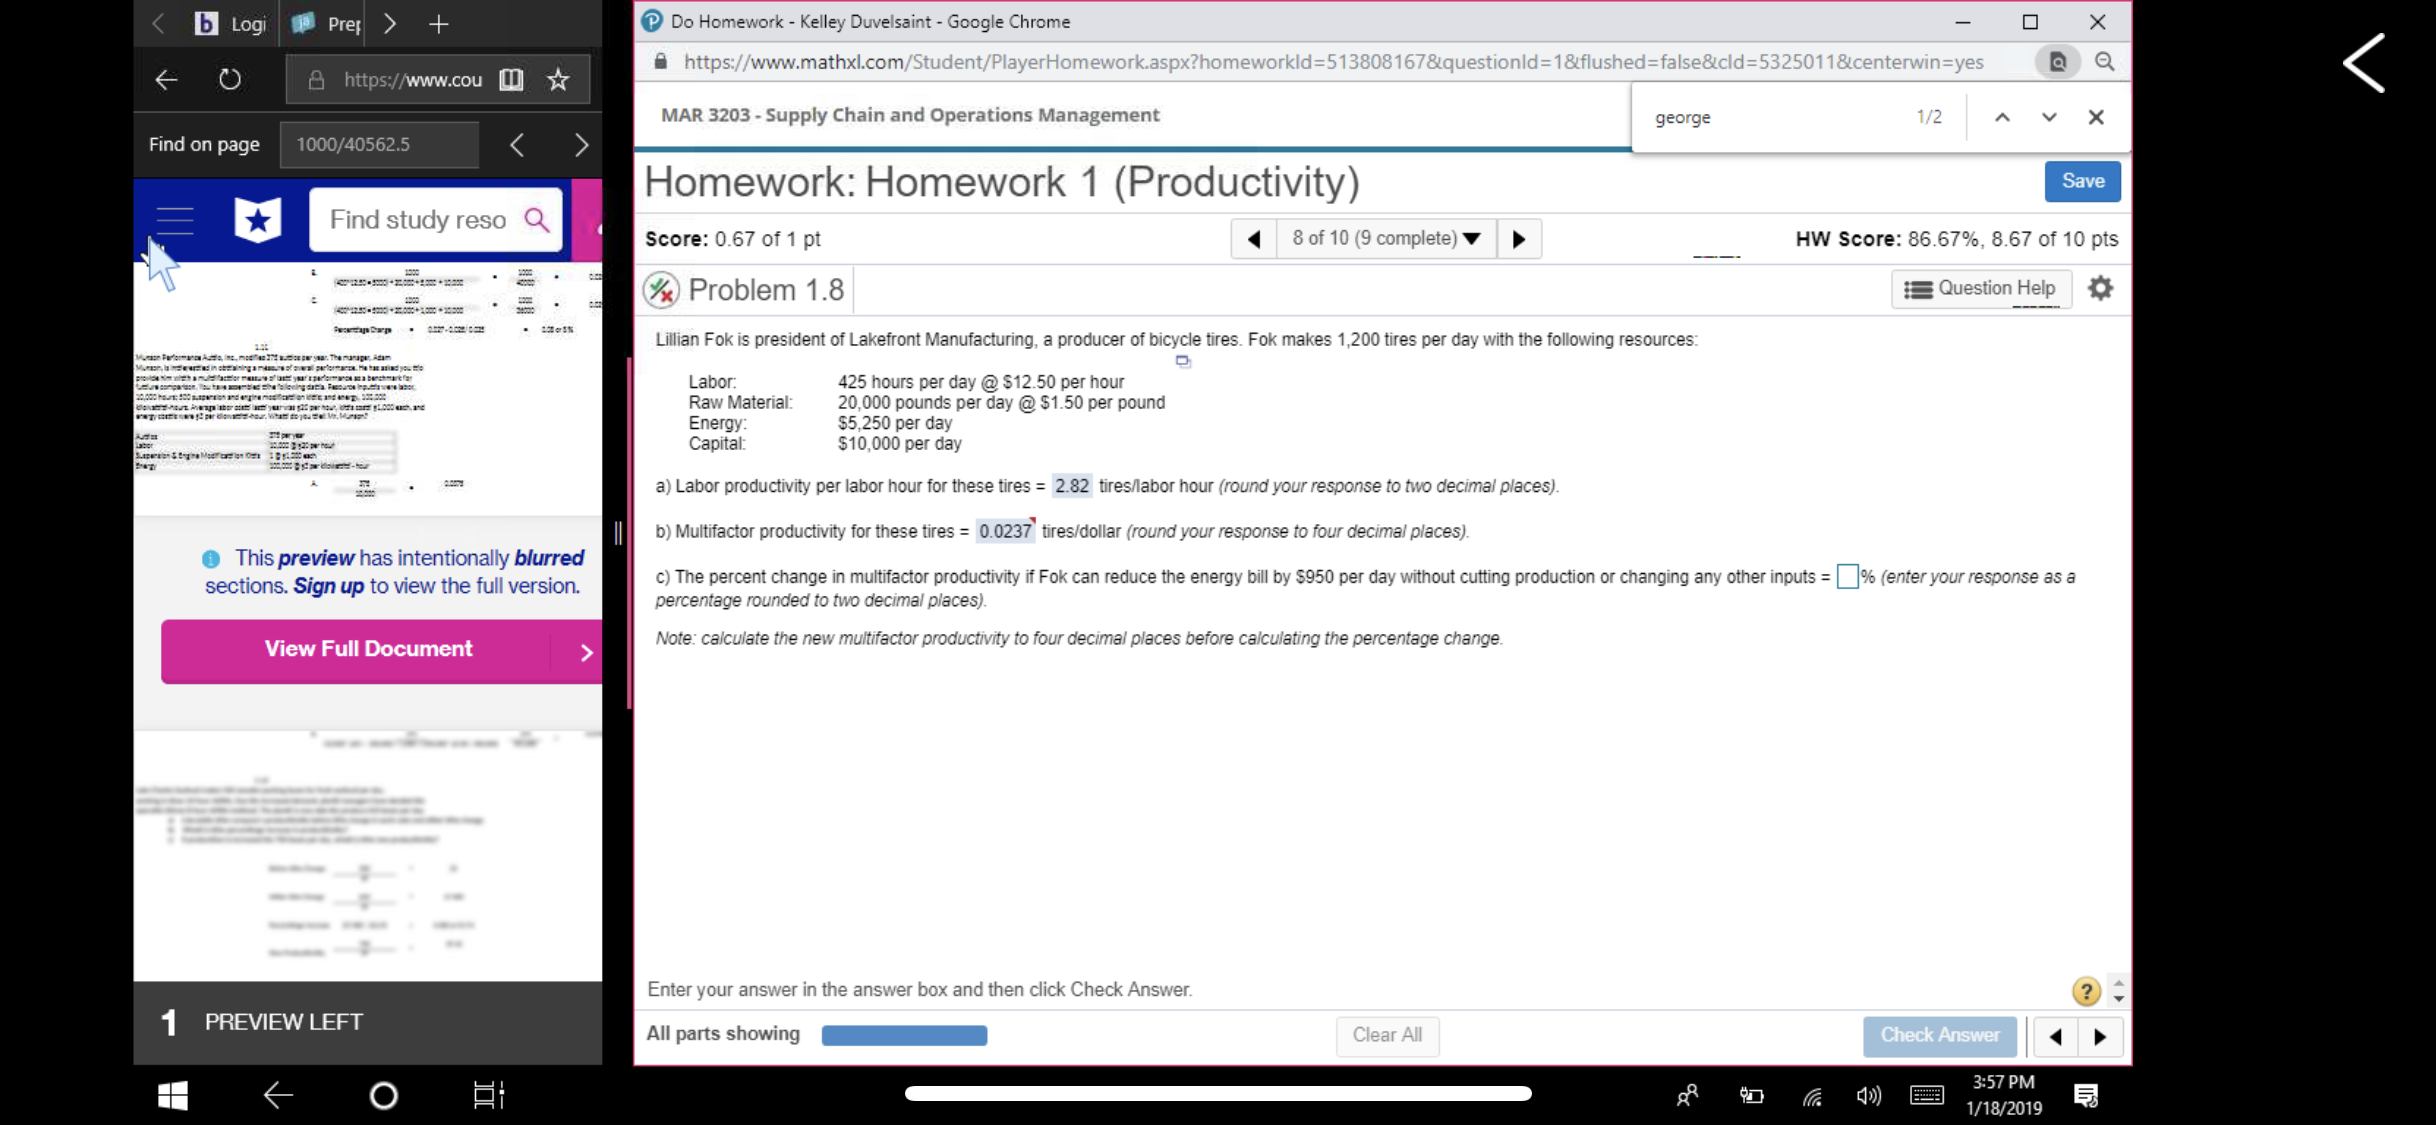 Do Homework - Kelley Duvelsaint -Google Chrome
https://www.mathxl.com/Student/PlayerHomework.aspx?homeworkld-513808 167&questionid=1&flushedzfalse&cld:5325011&centerwinsyes
®a
K O
https://www.cou
MAR 3203-Supply Chain and Operations Management
george
1/2
Find on page
1000/40562.5
Homework: Homework 1 (Productivity)
Score: 0.67 of 1 pt
Problem 1.8
Save
Find study reso Q
8 of 10 (9 complete)
HW Score: 86.67%, 8.67 of 10 pts
Question Help
Lillian Fok is president of Lakefront Manufacturing, a producer of bicycle tires. Fok makes 1,200 tires per day with the following resources
Labor
425 hours per day @$12.50 per hour
Raw Material 20,000 pounds per day @ $1.50 per pound
$5,250 per day
$10,000 per day
Energy
Capital
a) Labor productivity per labor hour for these tires 2.82 tires/labor hour (round your response to two decimal places)
b) Multifactor productivity for these tires 0.0237 tires/dollar (round your response to four decimal places)
c) The percent change in mult factor productivity Fok can reduce the energy bill by S950 per day without cutting production or changing any other inputs-
This preview has intentionally blurred
sections. Sign up to view the full version.
% enter your response as a
percentage rounded to two decimal places)
Note: calculate the new multifactor productivity to four decimal places before calculating the percentage change
View Full Document
Enter your answer in the answer box and then click Check Answer
PREVIEW LEFT
All parts showing
Clear All
Check Answer
3:57 PM
1/18/2019
